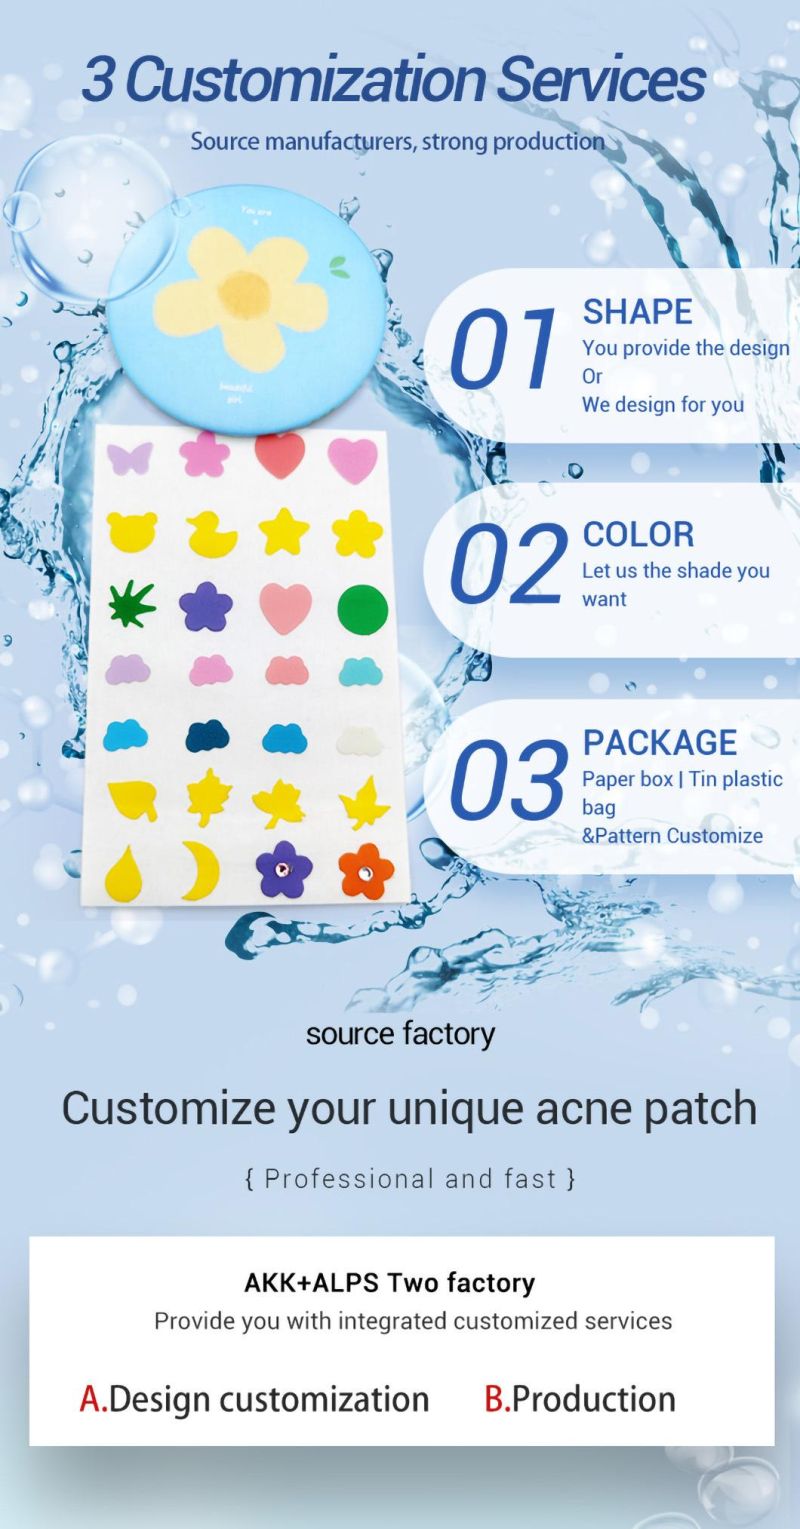 Alps Good Quality and Price of Patche Acne Master Hydrocolloid OEM Pimple Patch